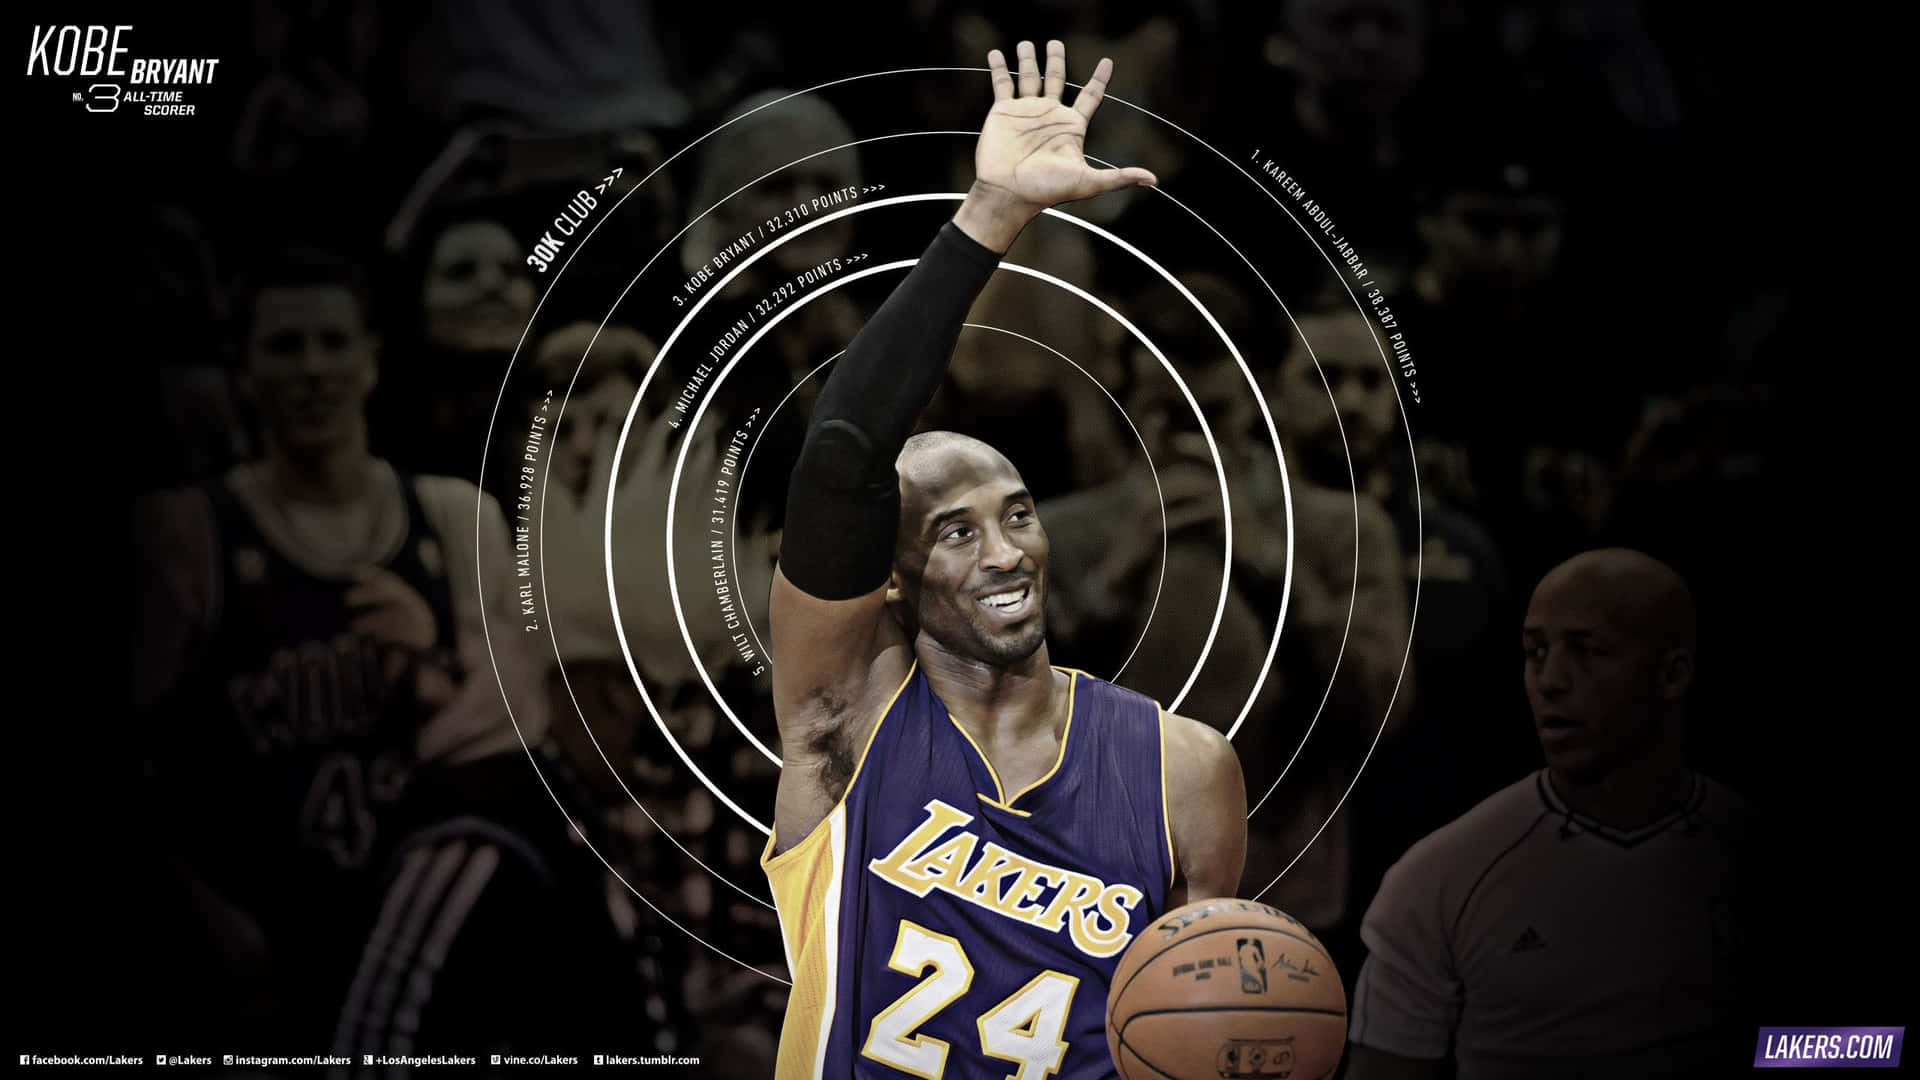 Kobe Bryant showing off his championship rings